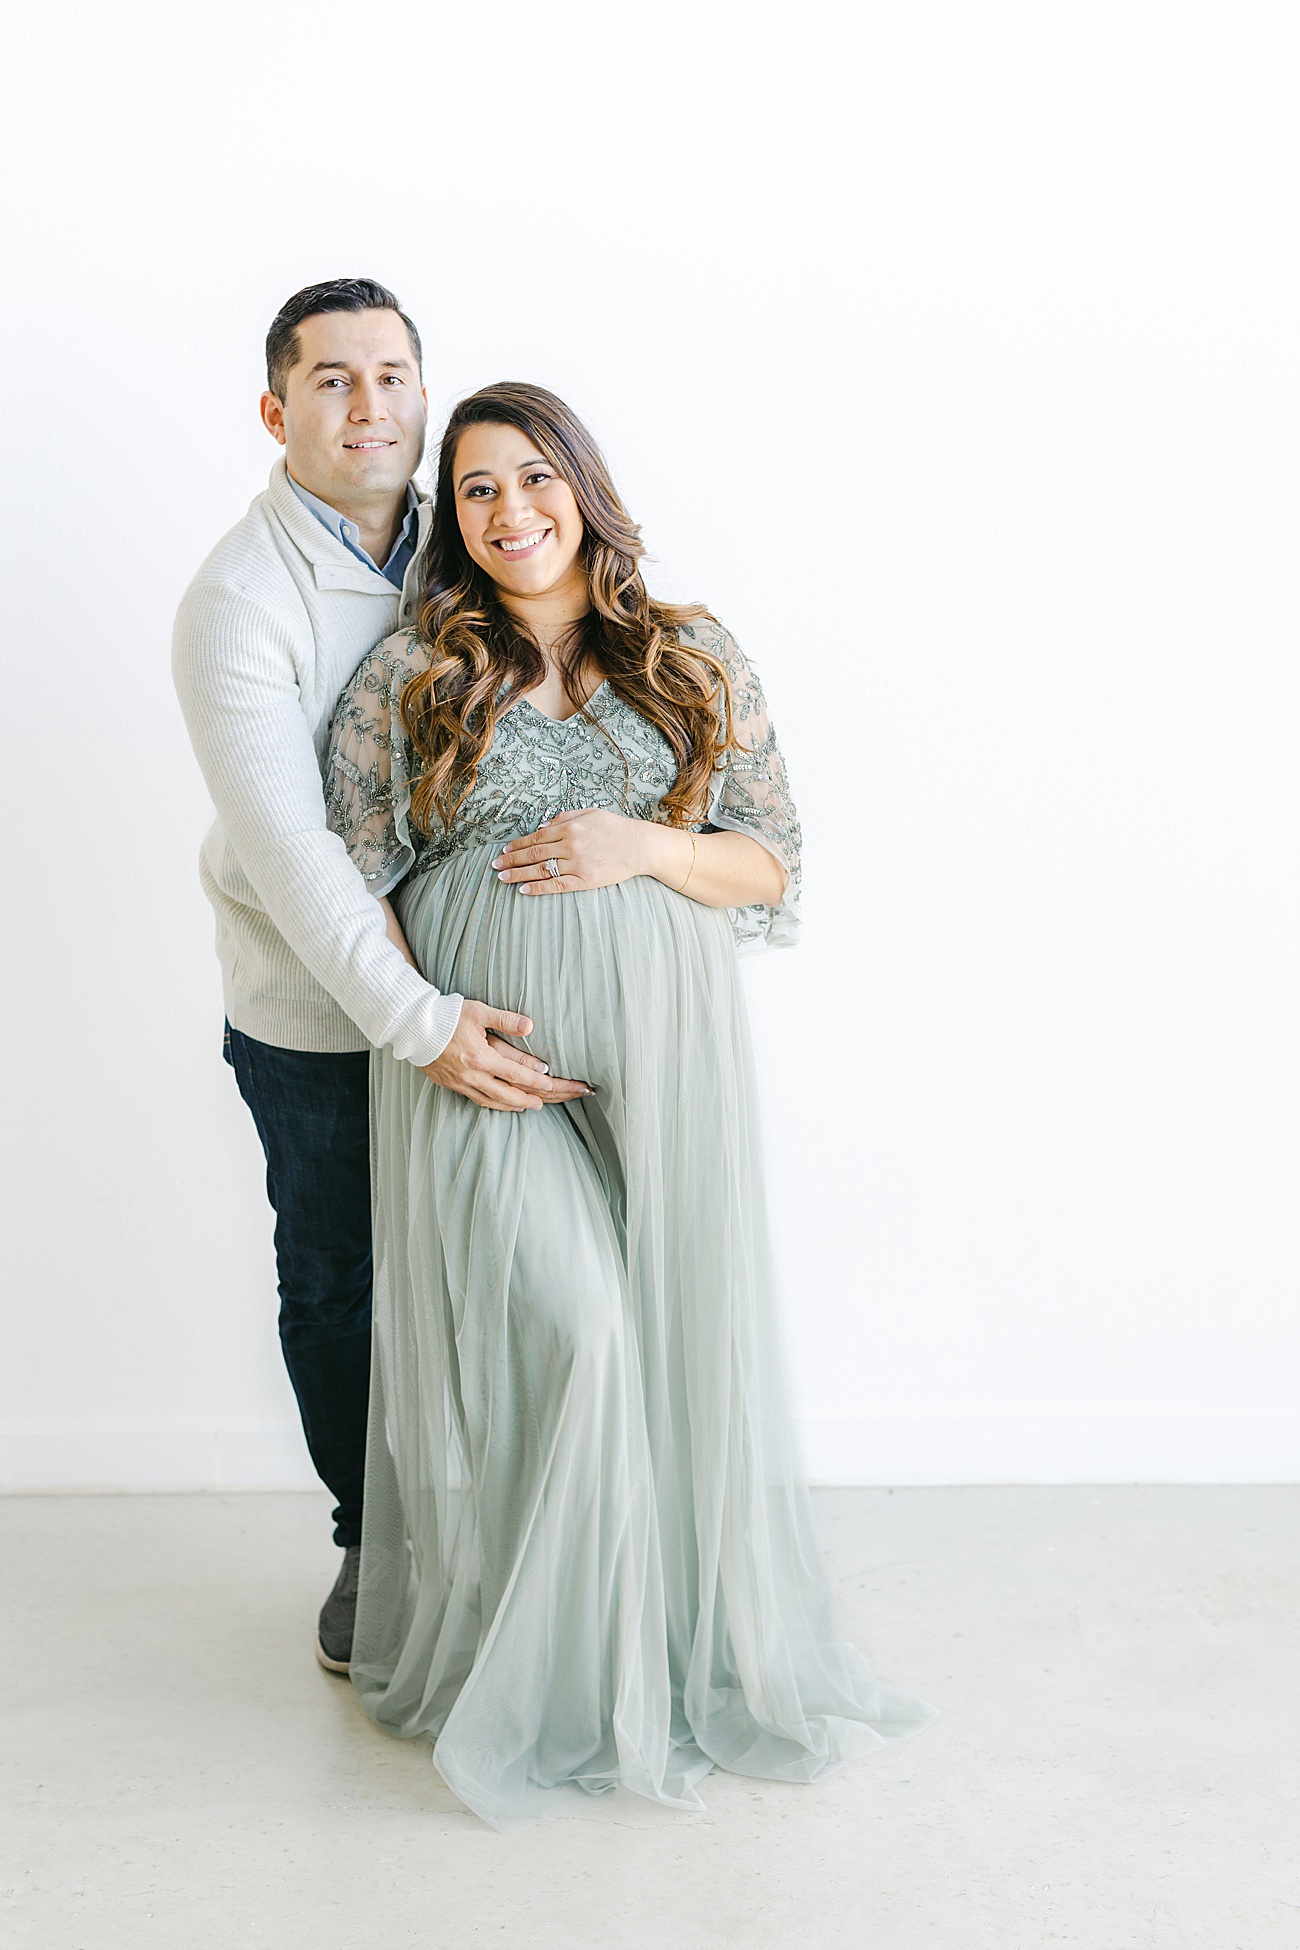 Sweet photo of expecting parents smiling at the camera during maternity photos with Sana Ahmed Photography.